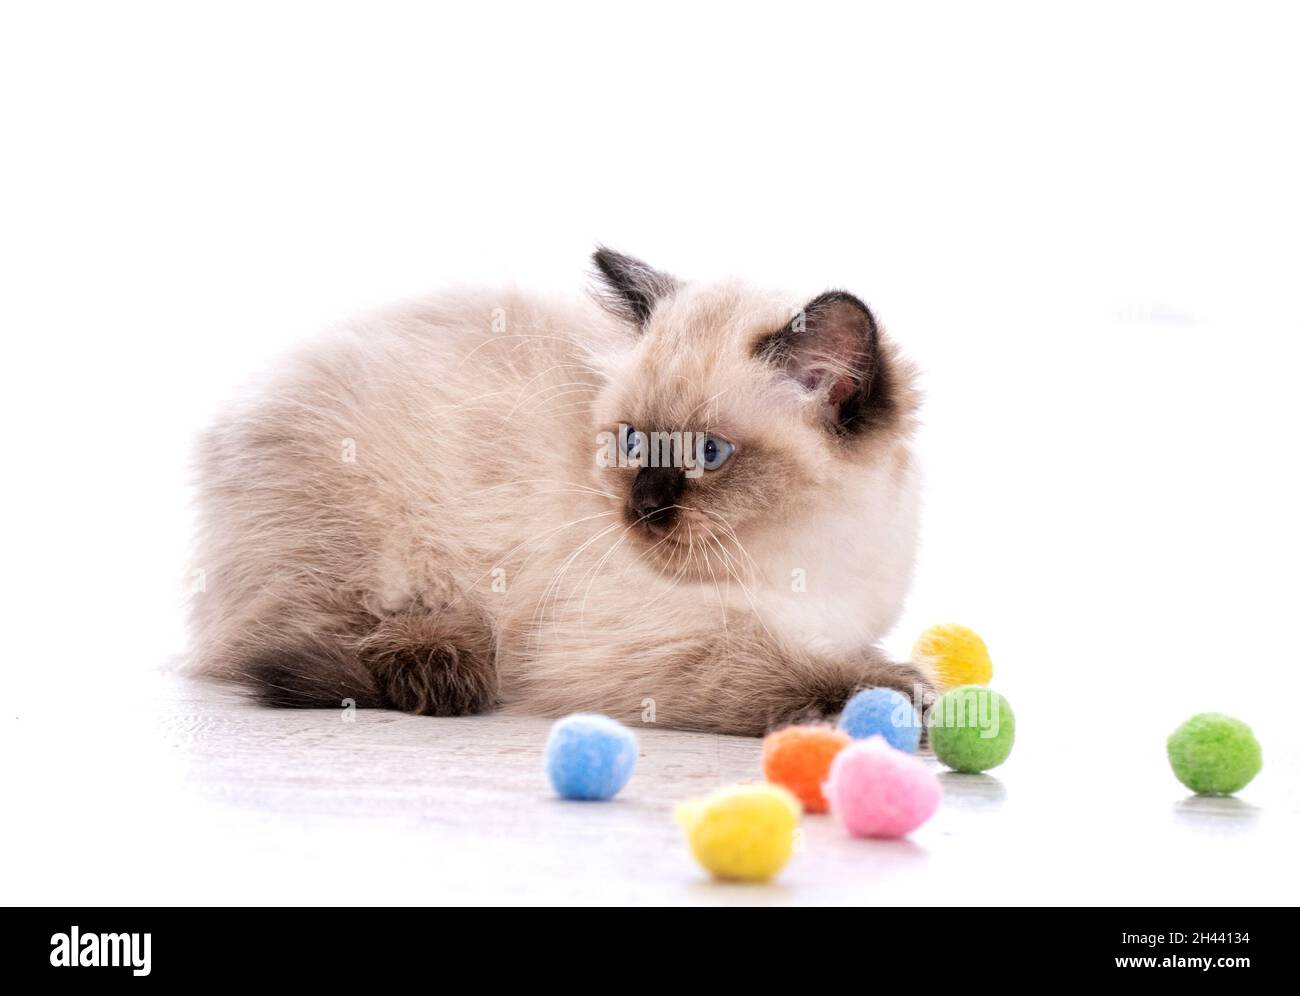 Kitten Ragdoll playing with toys Stock Photo